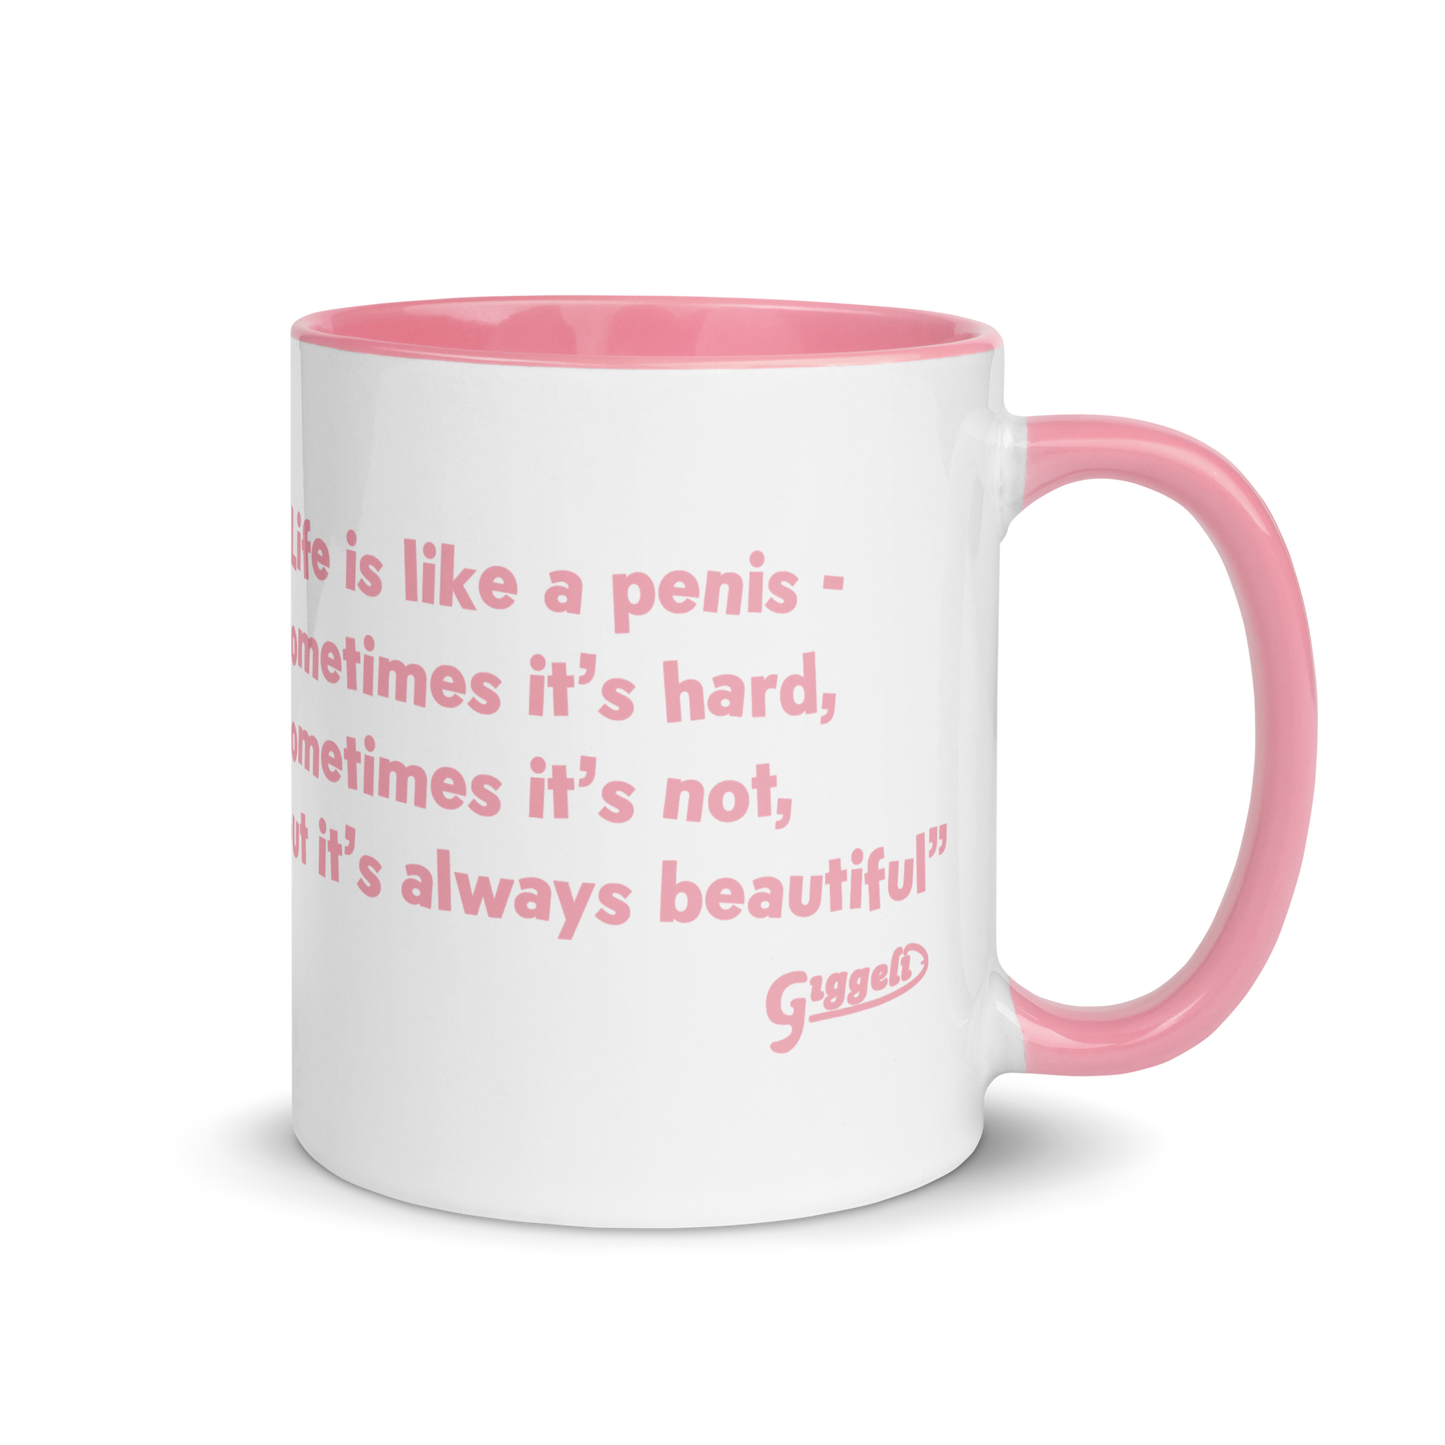 Giggeli penis mug, featuring a clever design that adds a touch of humor and body positivity to your morning coffee